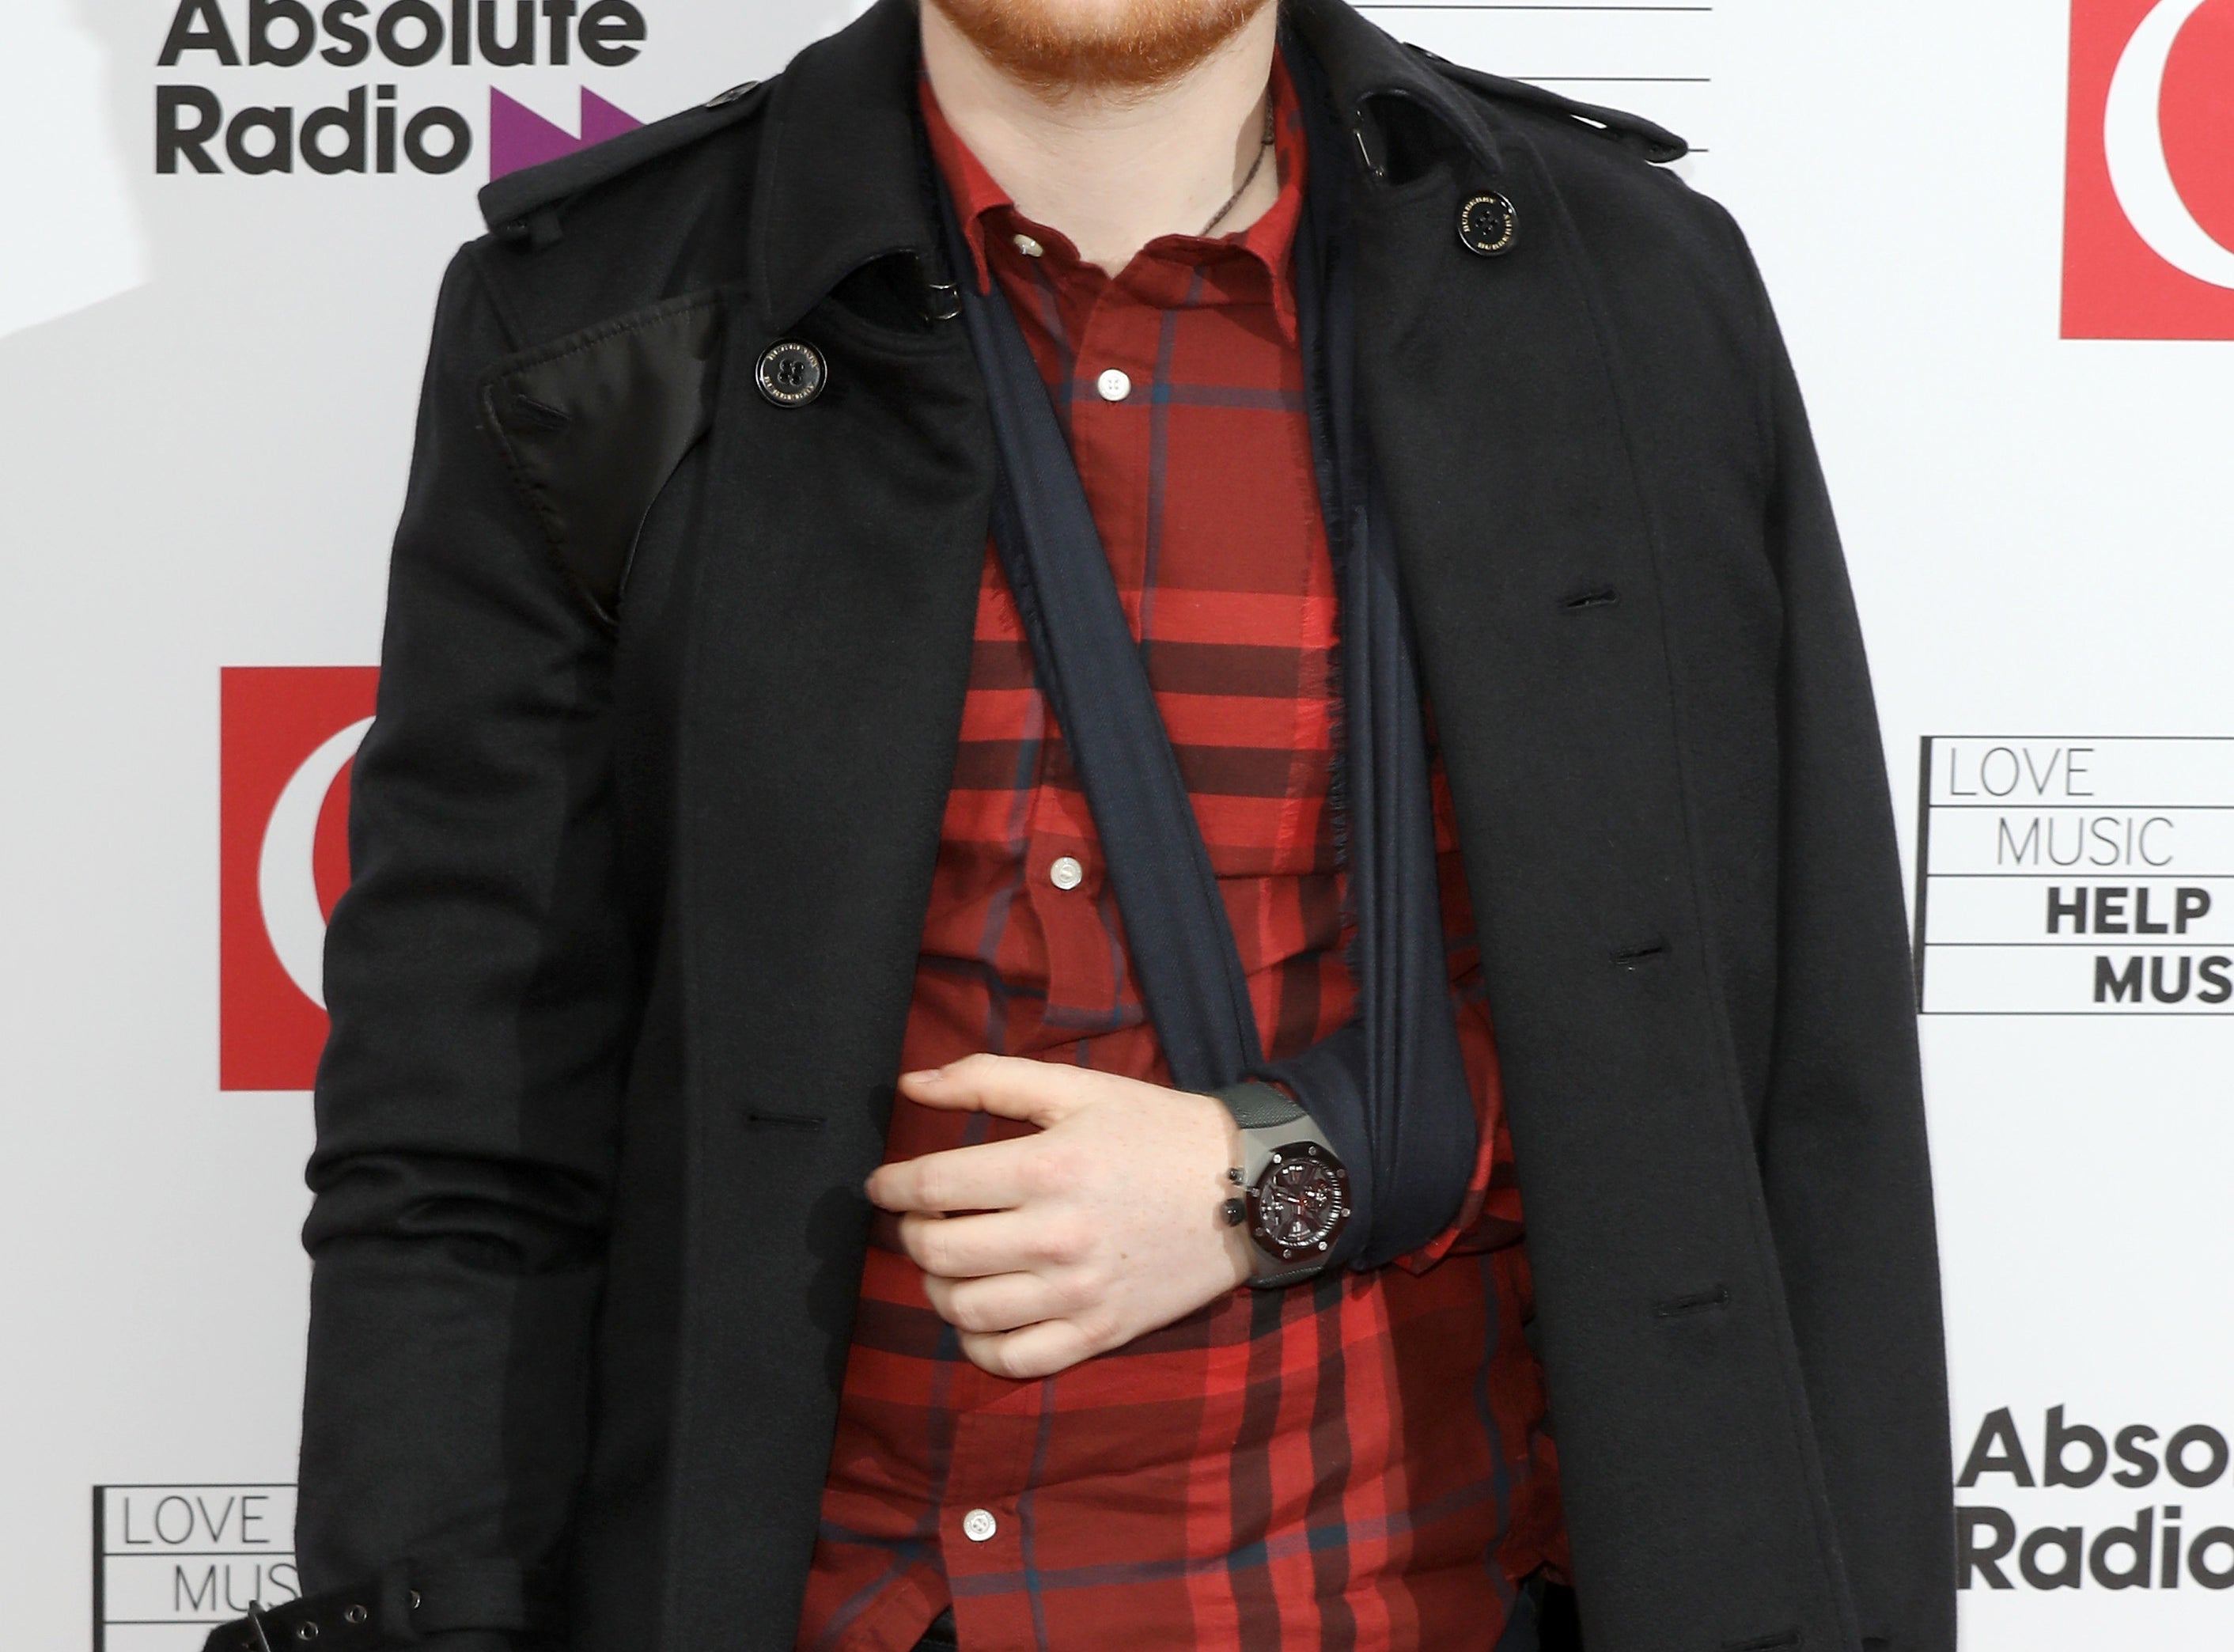 Ed poses on a red carpet in a red plaid shirt and black jacket